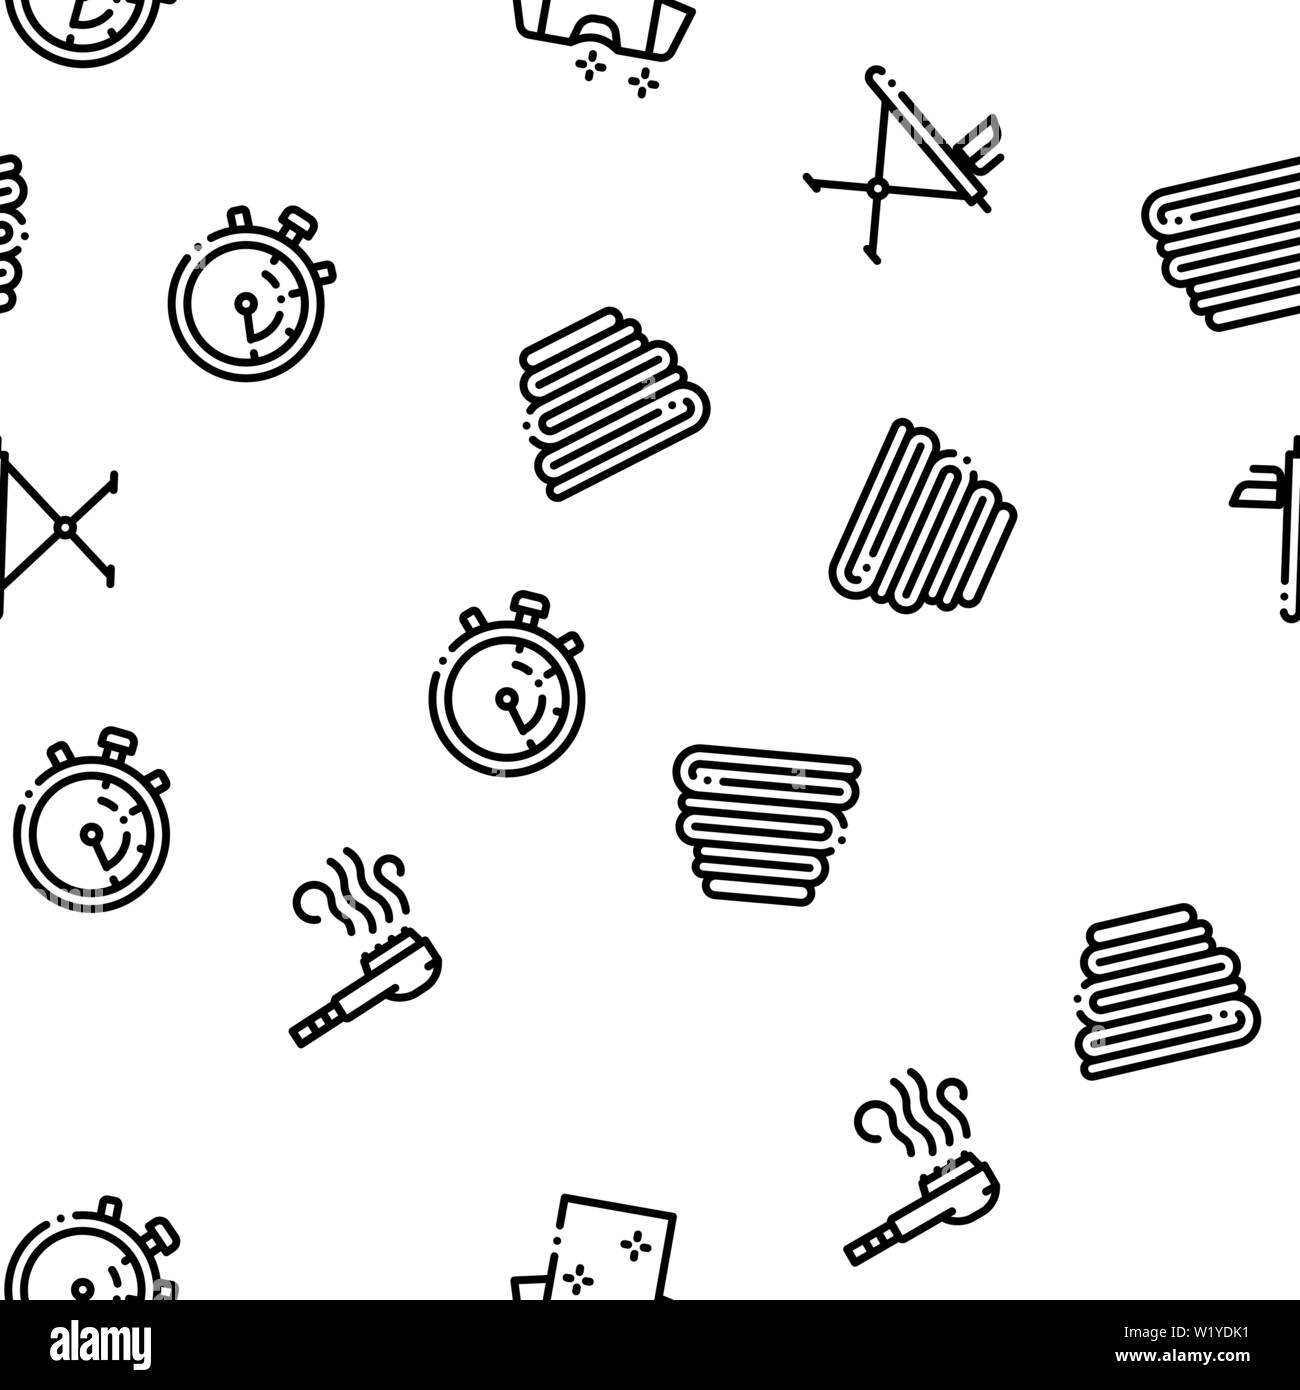 Laundry Service Vector Seamless Pattern Stock Vector